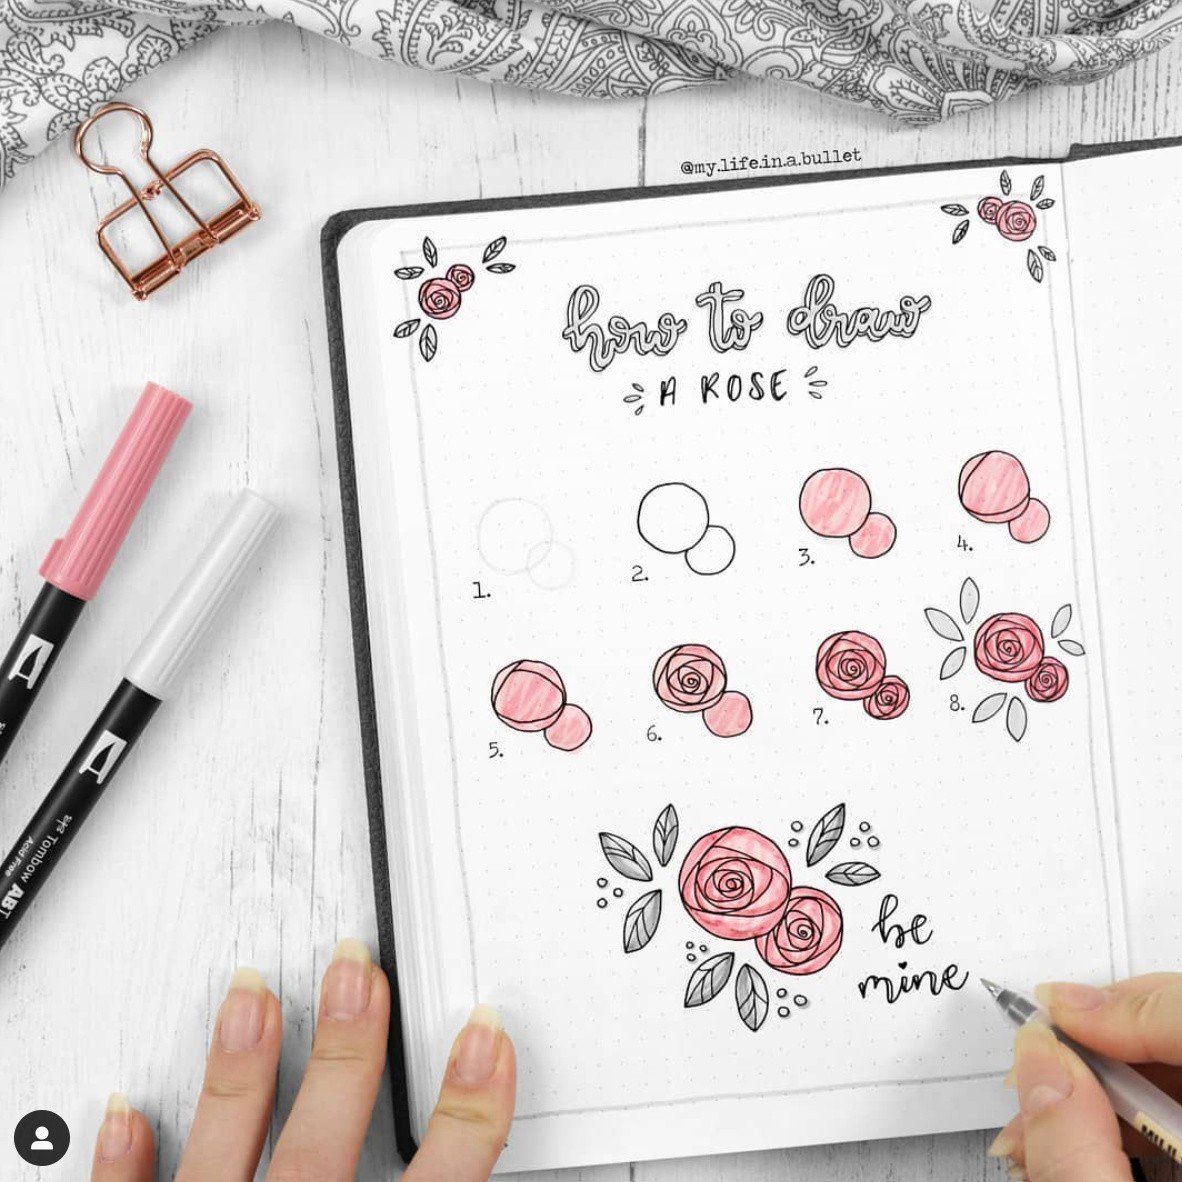 How to draw a rose step by step for beginners